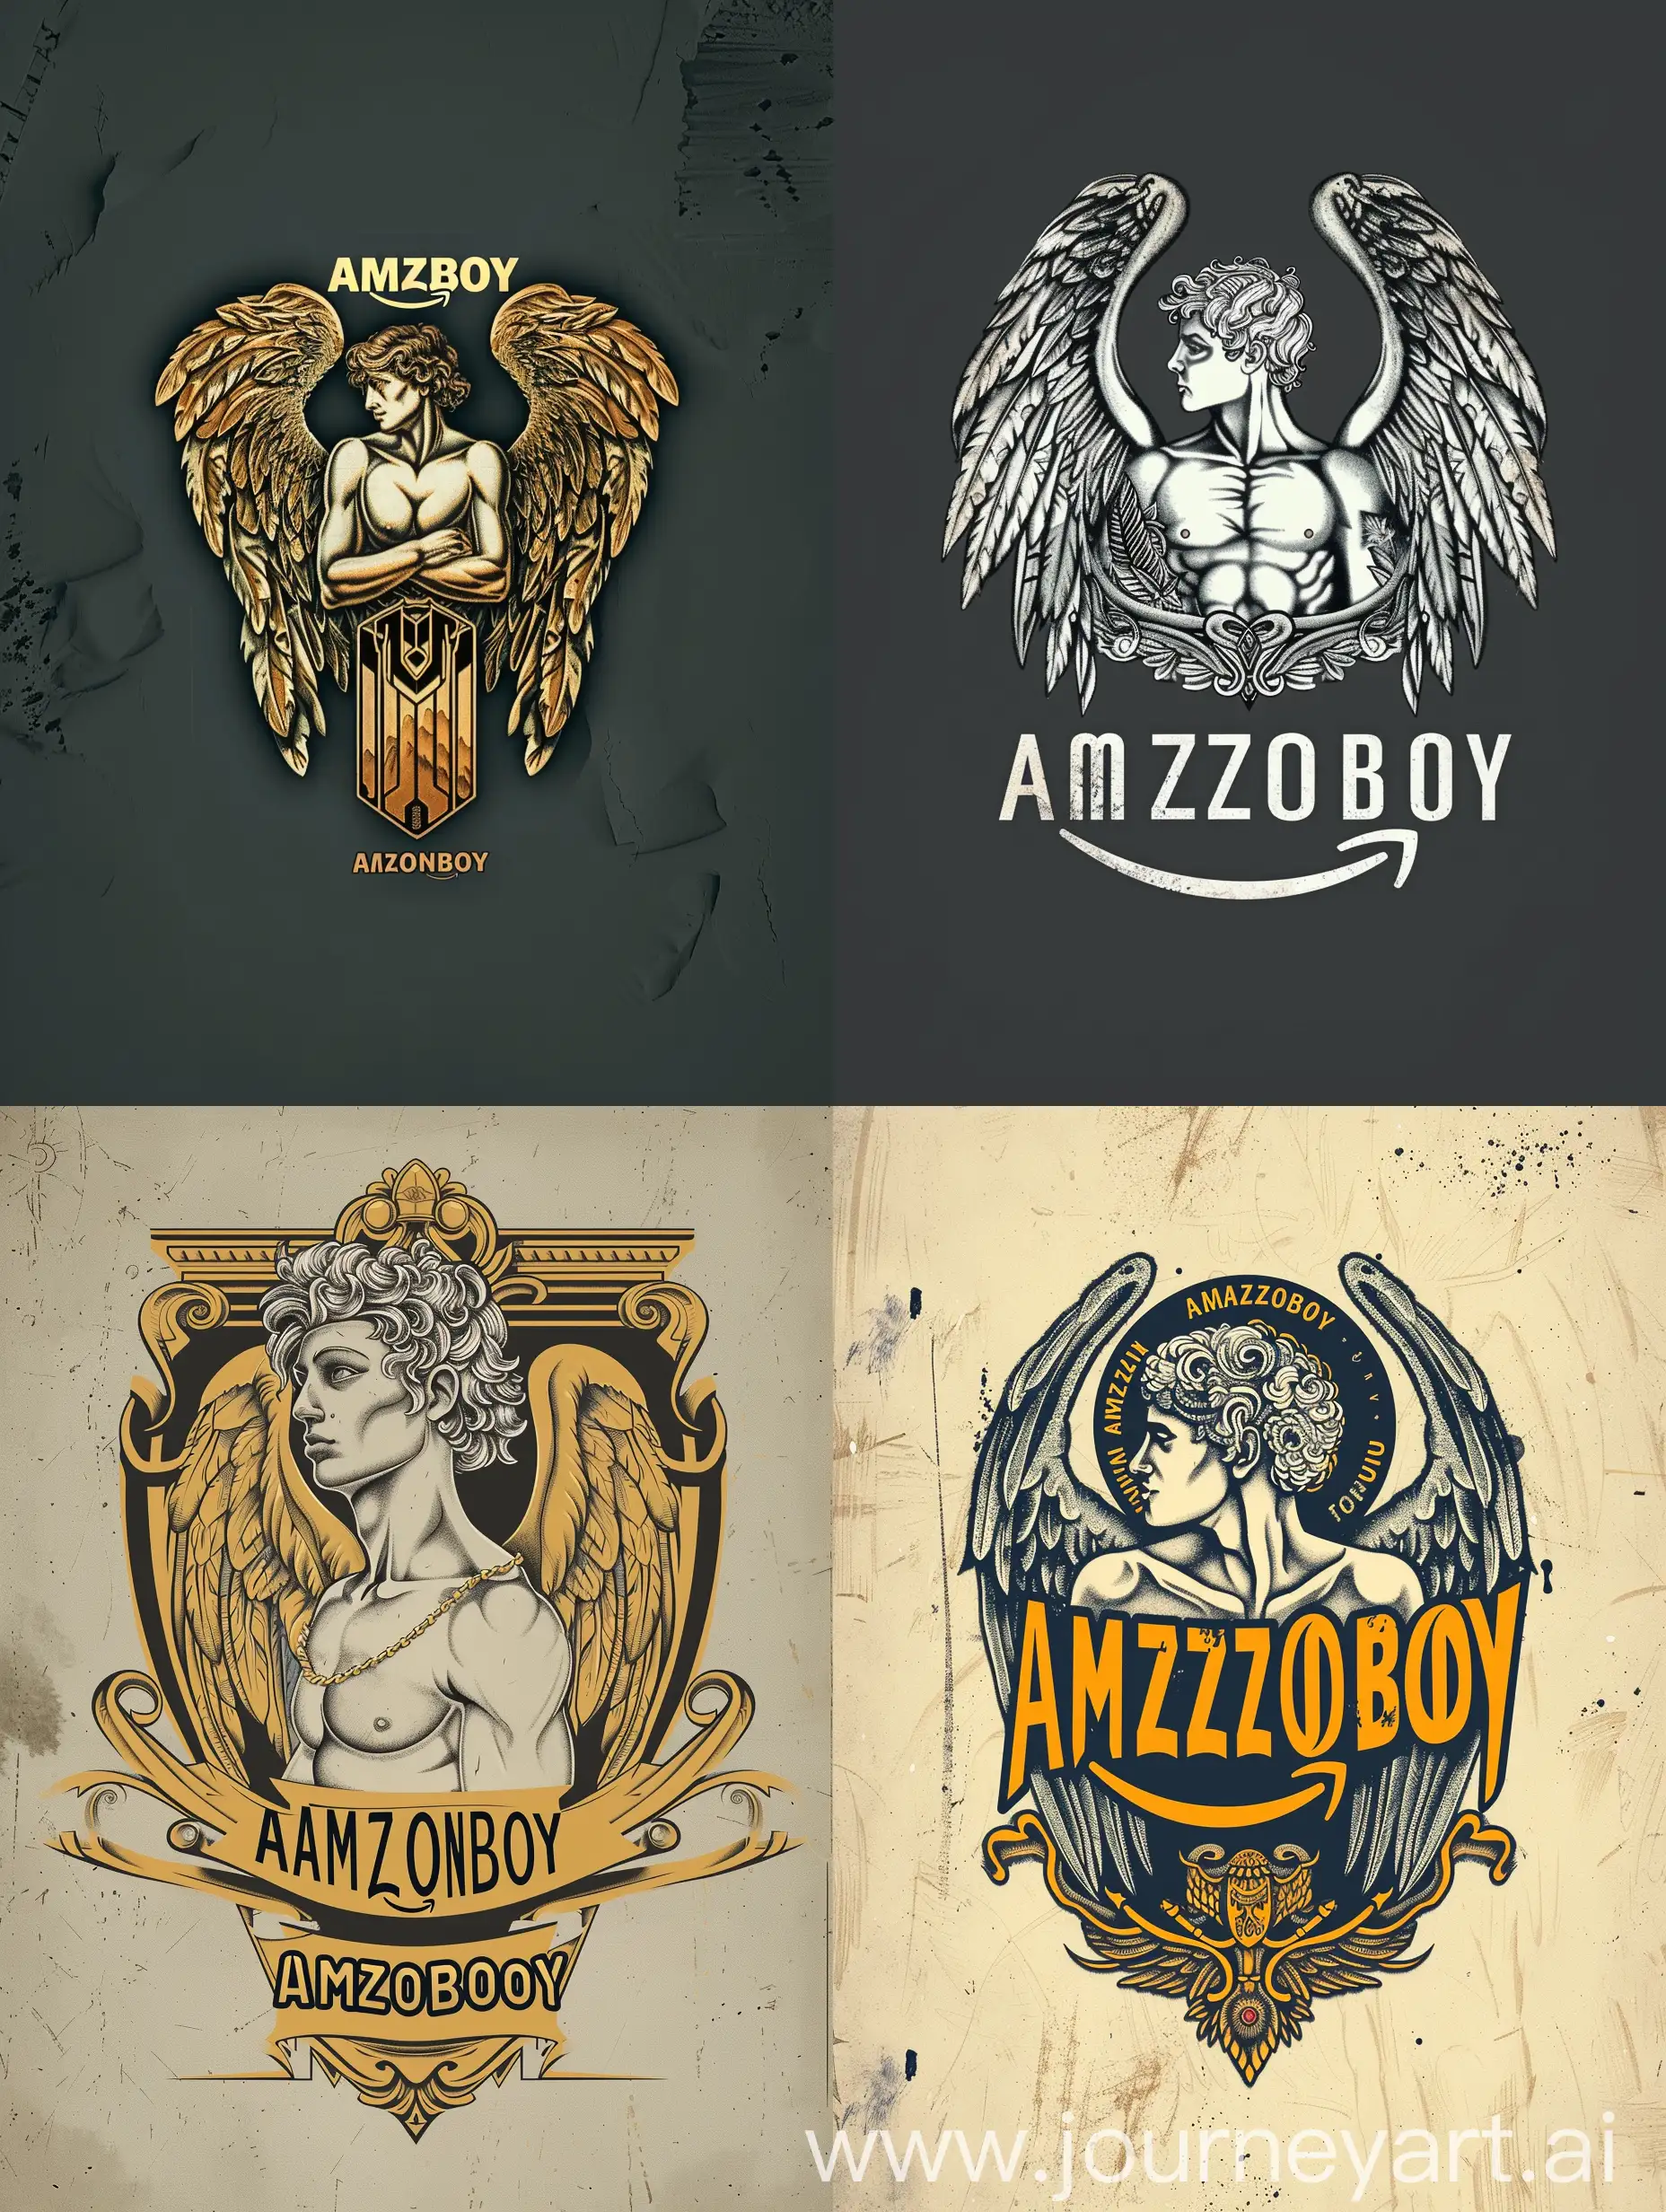 a vintage logo design for a streetwear brand called "AMZONBOY" about mythology and angels